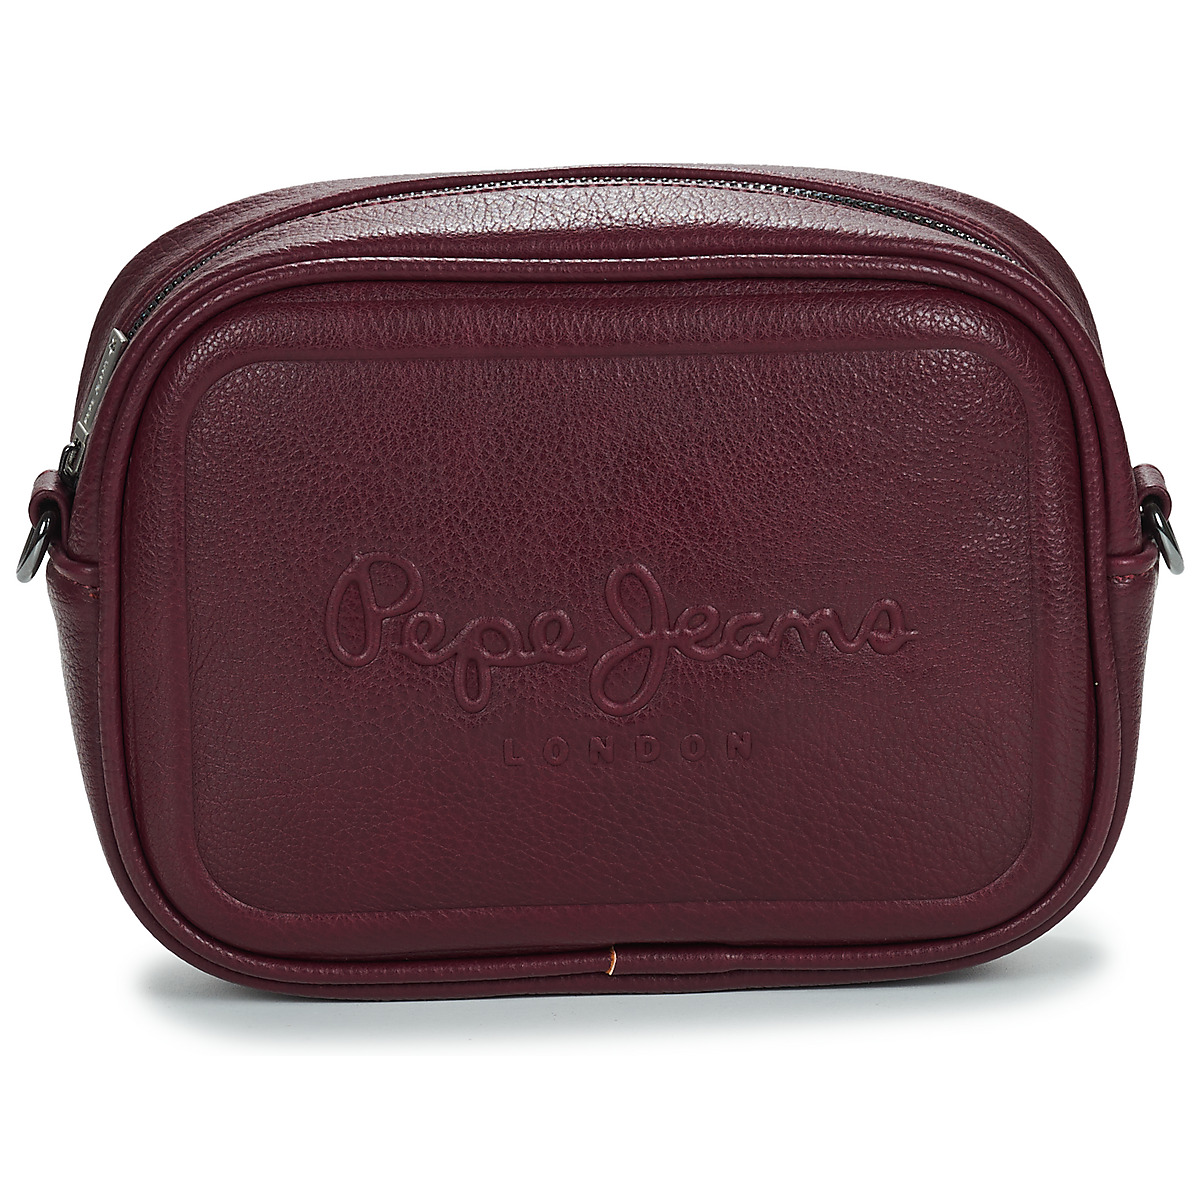 Pepe jeans Bordeaux BASSY BASS iw0wXnEd